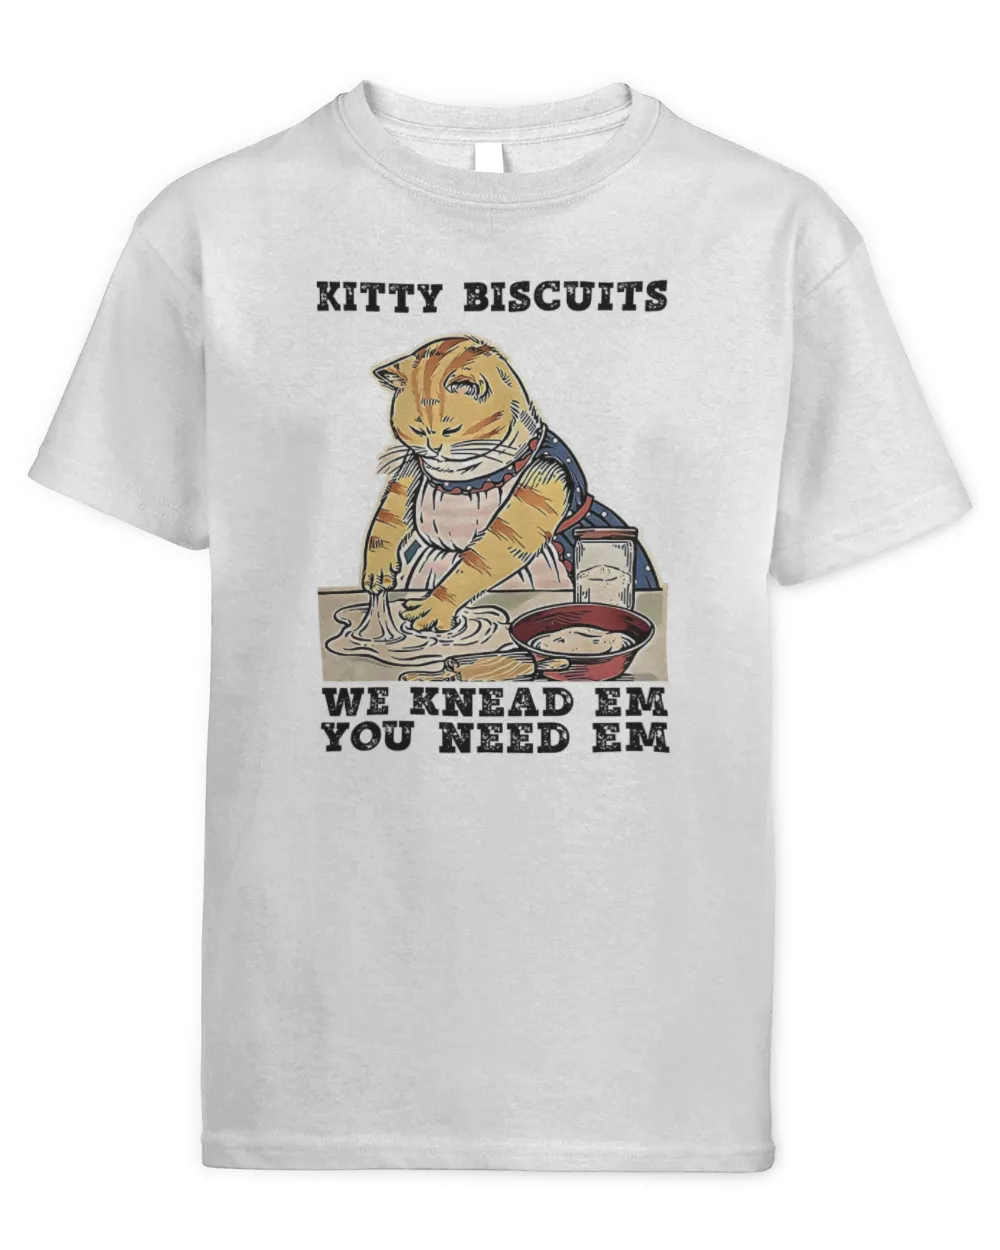 Kitty Biscuits You Need Em We Knead Em Sweatshirt, Cat Making Biscuits T-Shirt, Funny Kitty Sweater, Baker Cat Shirt, Cat Mom Crewneck